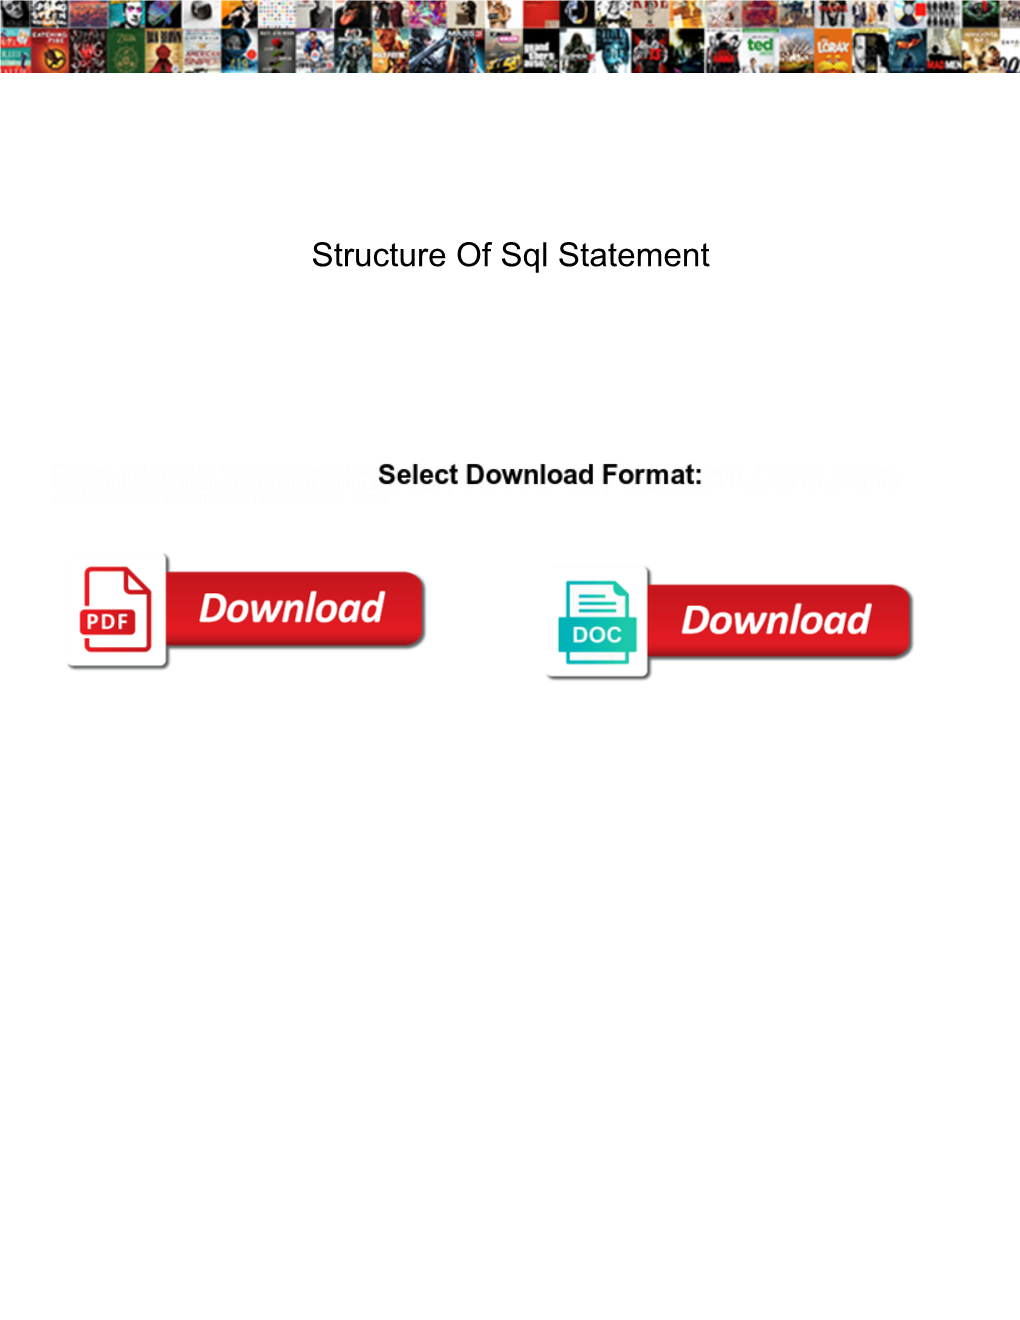 Structure of Sql Statement